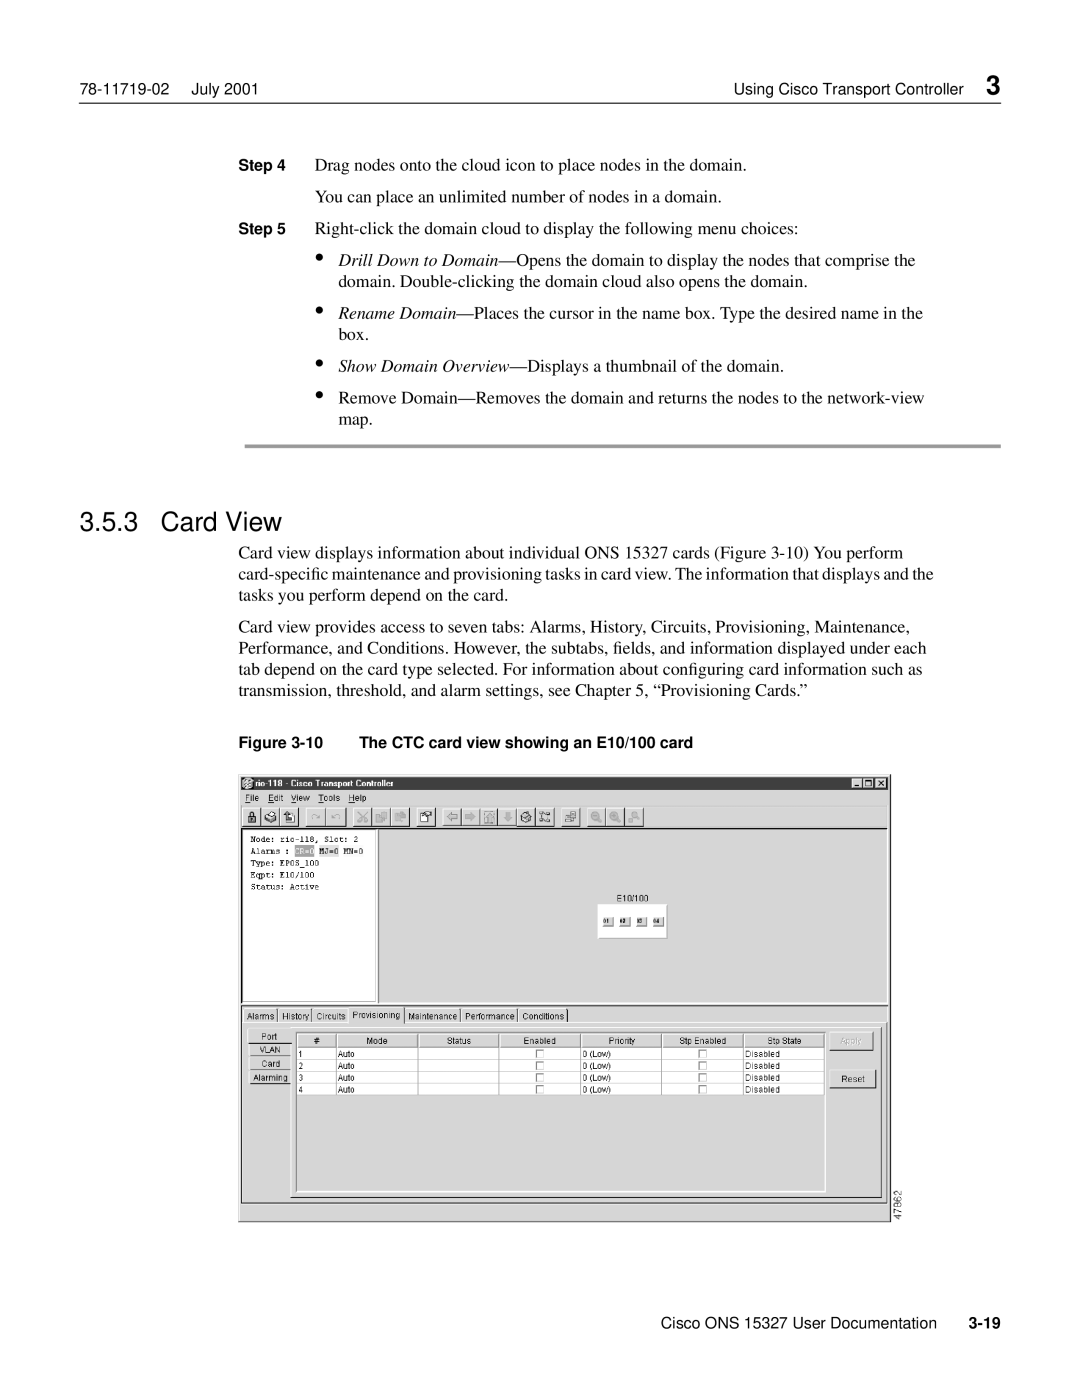 Cisco Systems ONS 15327 manual Card View 